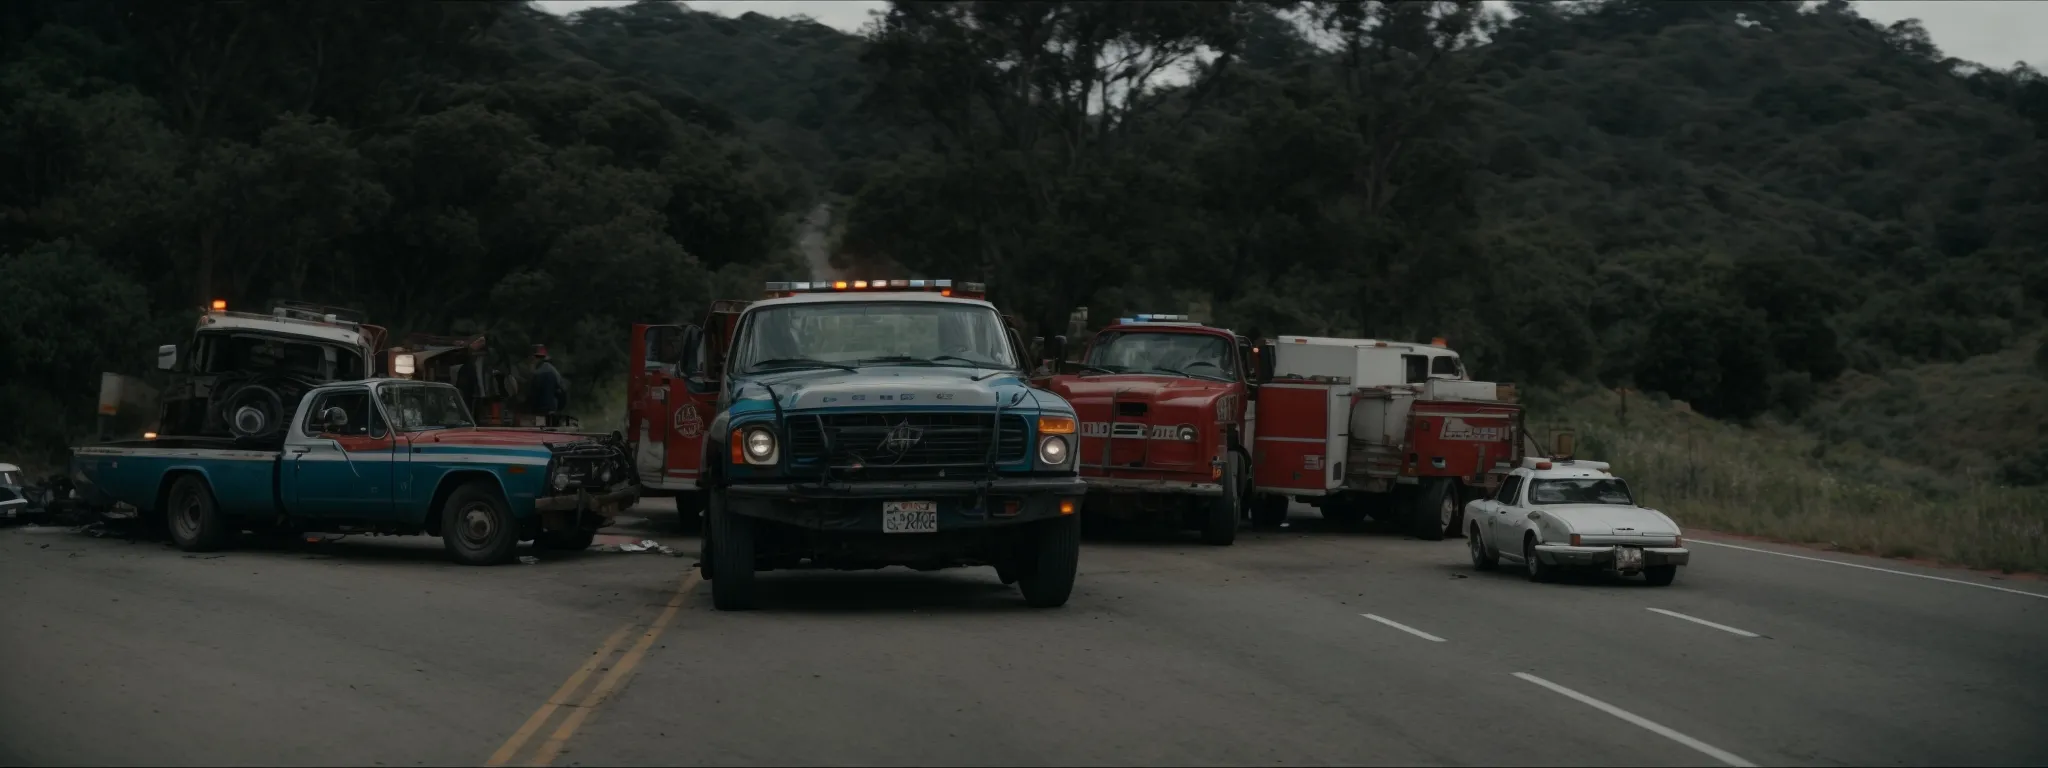 a wrecked truck and a car pulled over on the side of a san francisco road with emergency vehicles and concerned bystanders in the background.